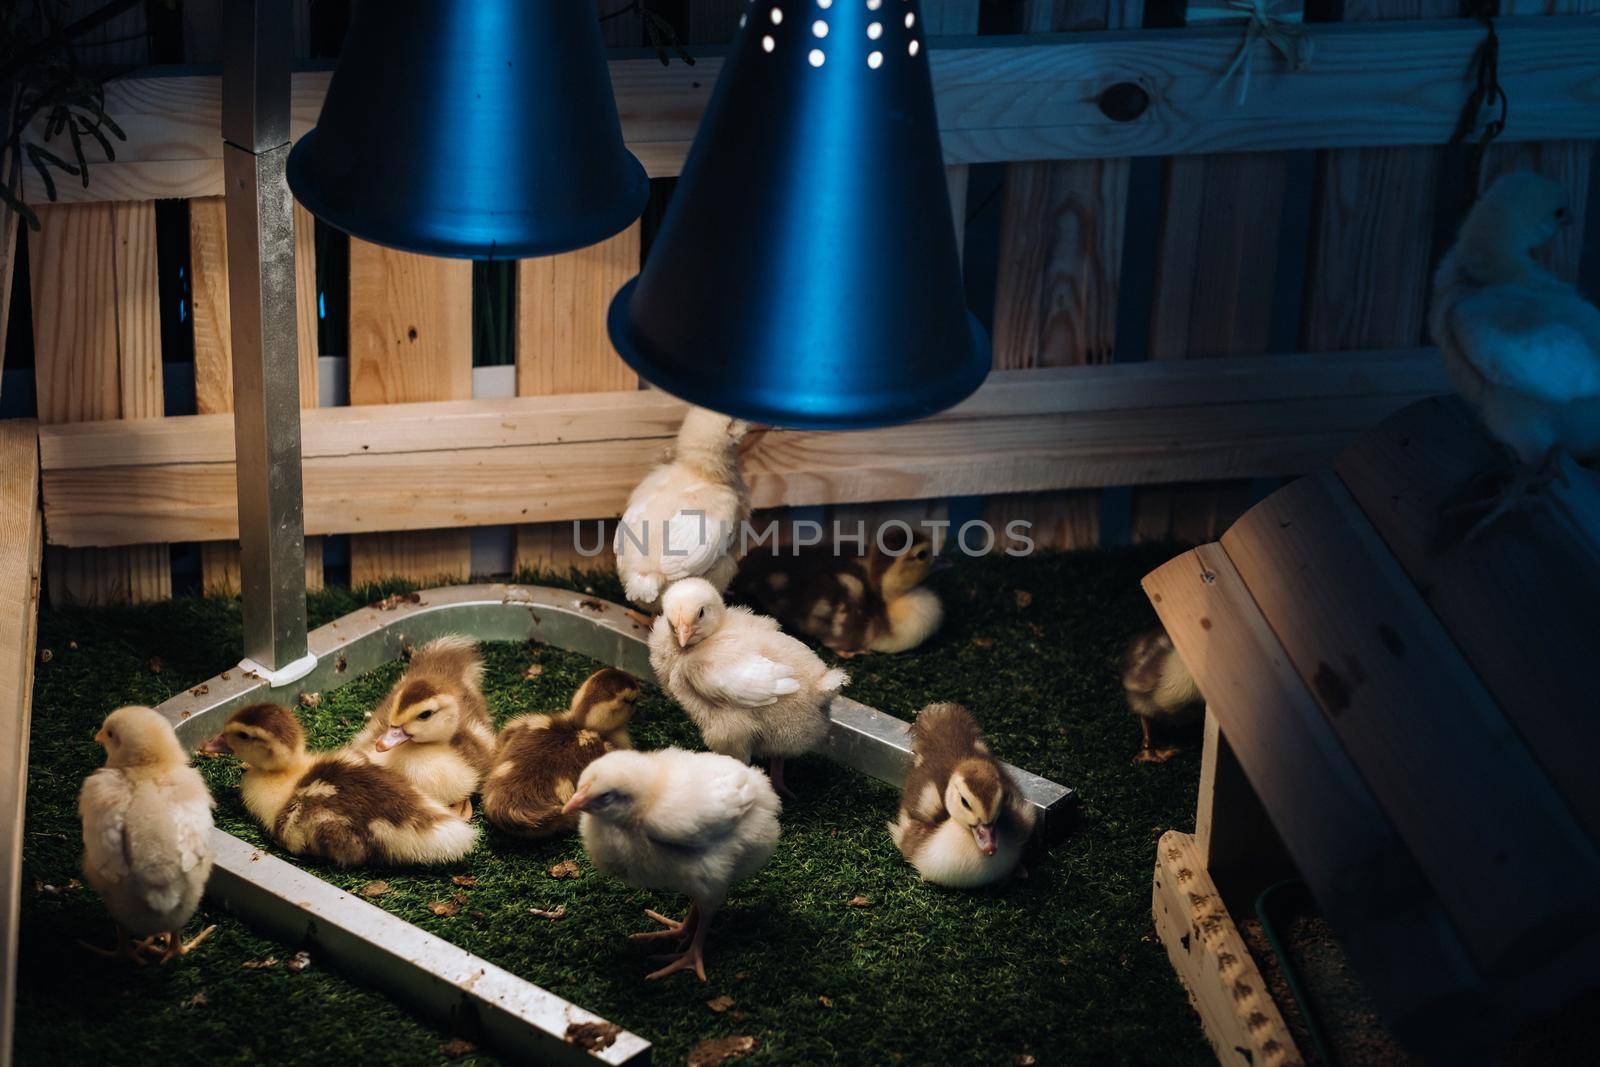 Small chickens and ducklings bask on the grass under a lamp in the yard.